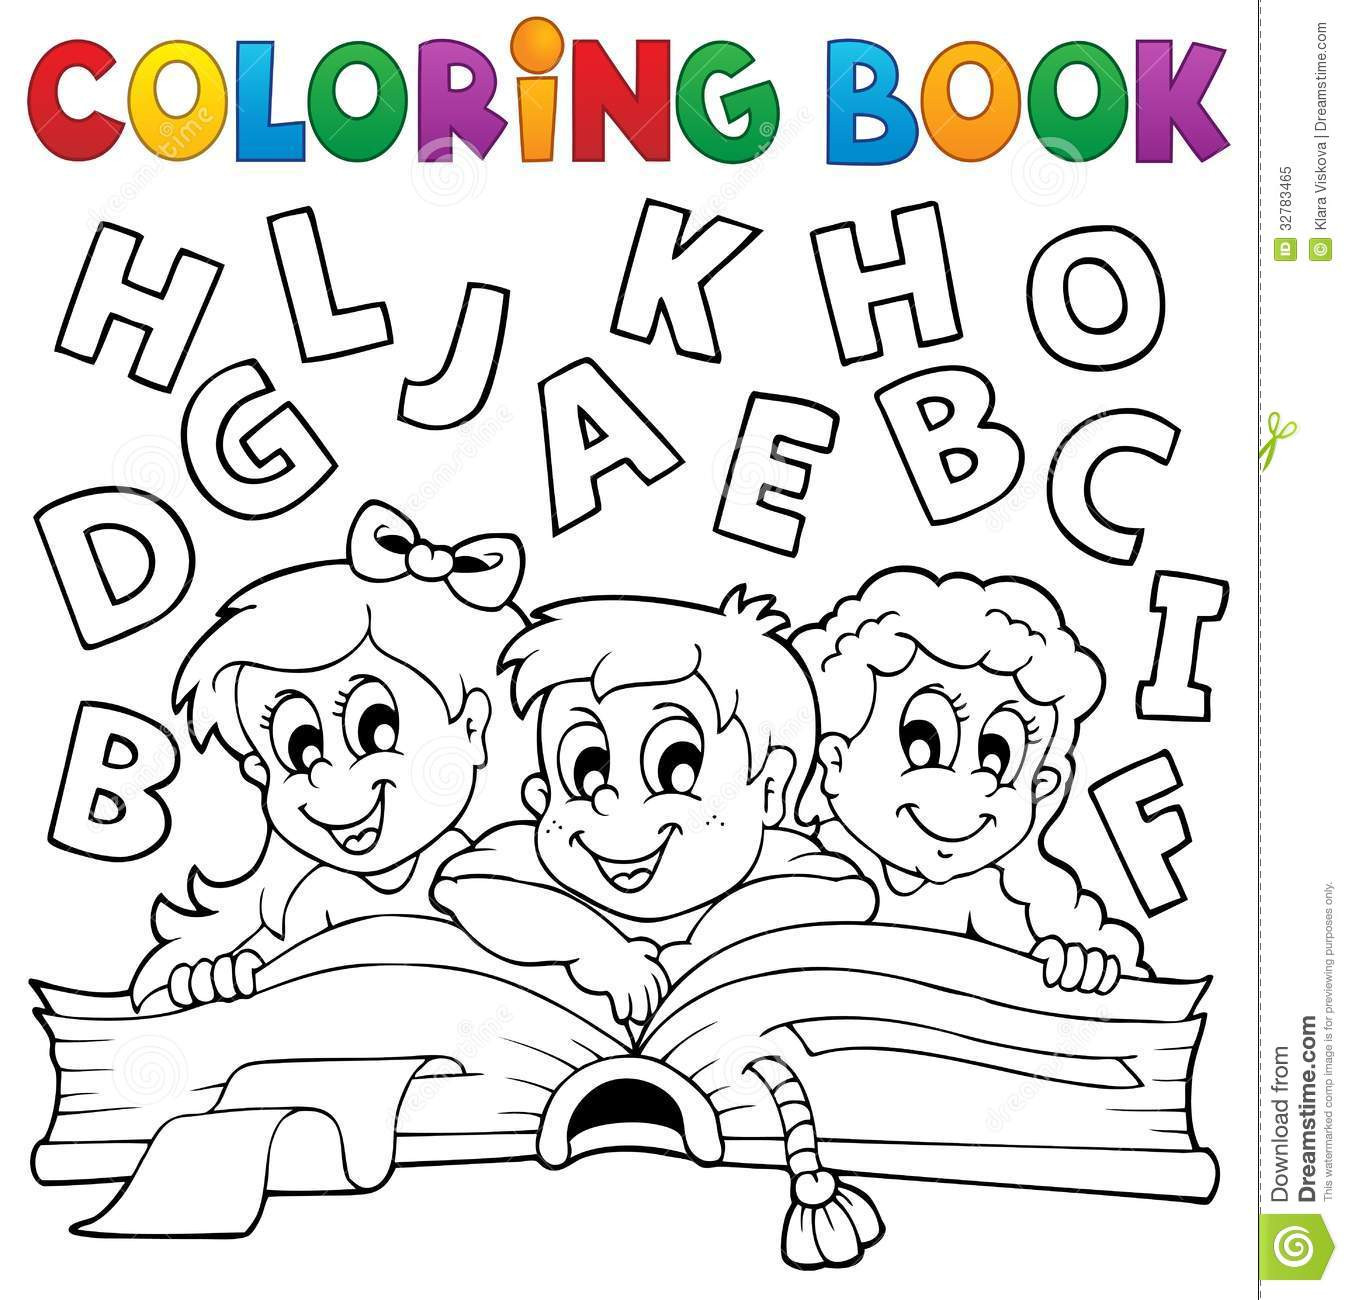 Children Coloring Books
 Coloring book kids theme 5 stock vector Image of clipart